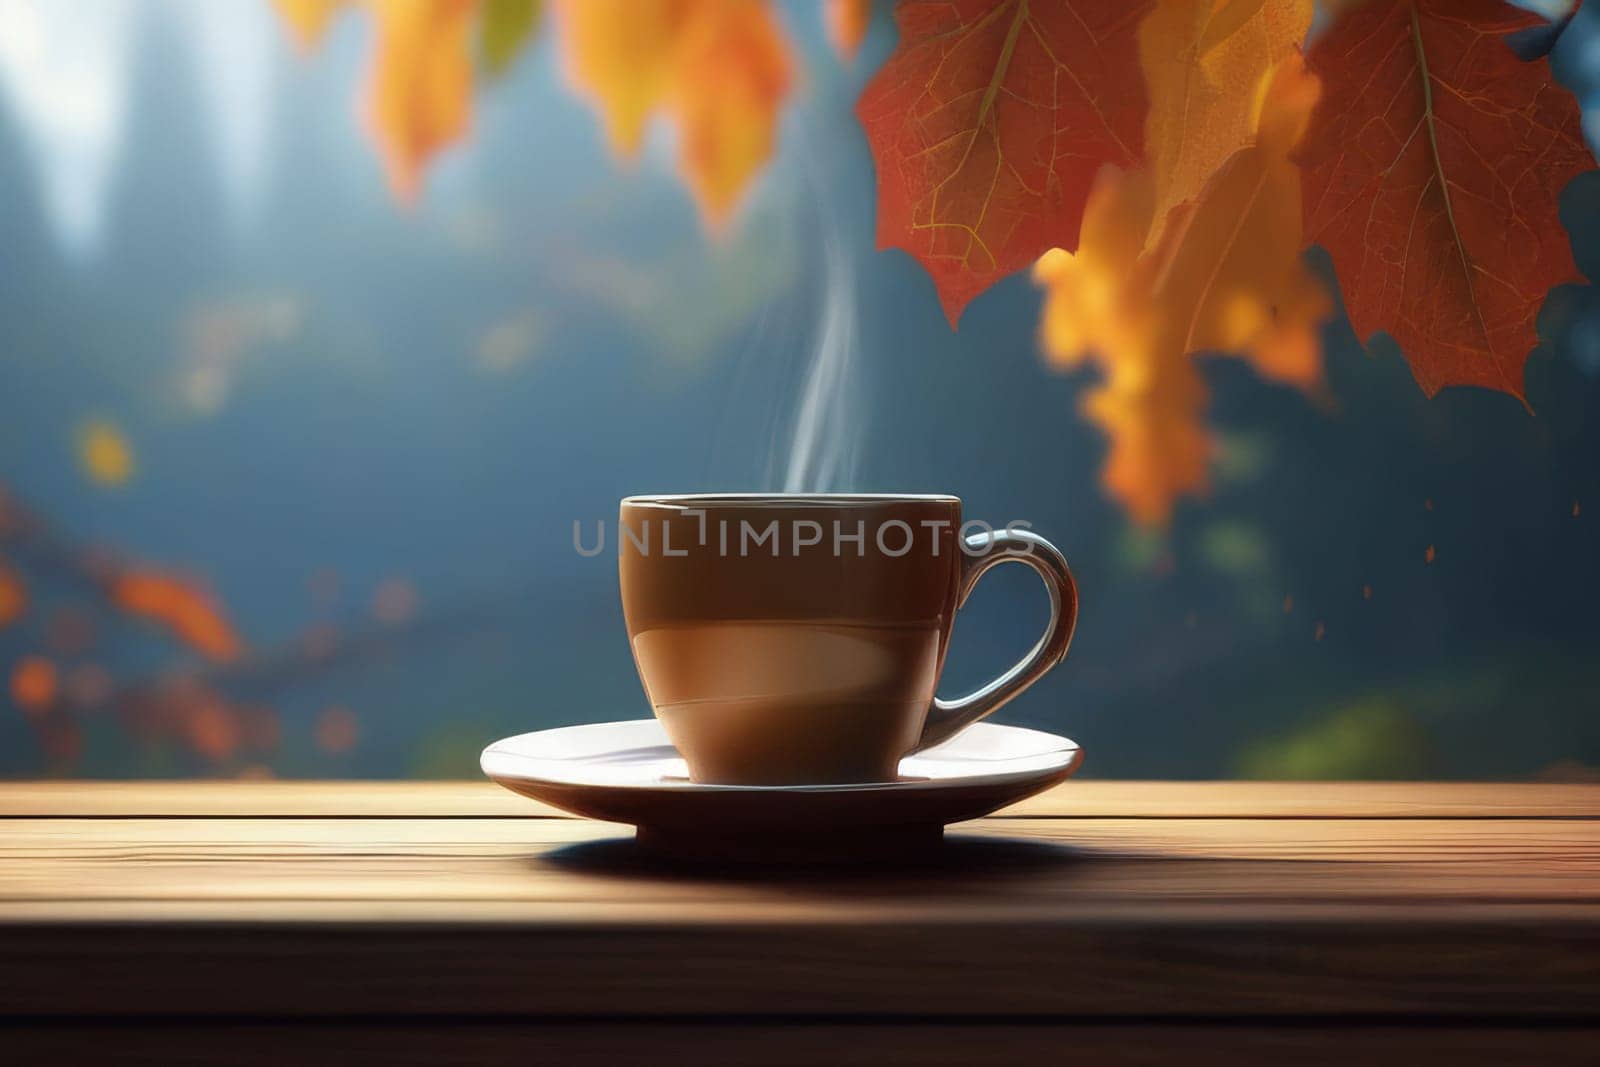 Autumn leaves and a hot steaming cup of coffee. Wooden table and cup of coffee on autumn background. Autumn season, free time, coffee break, September, October, November concept. by Ekaterina34